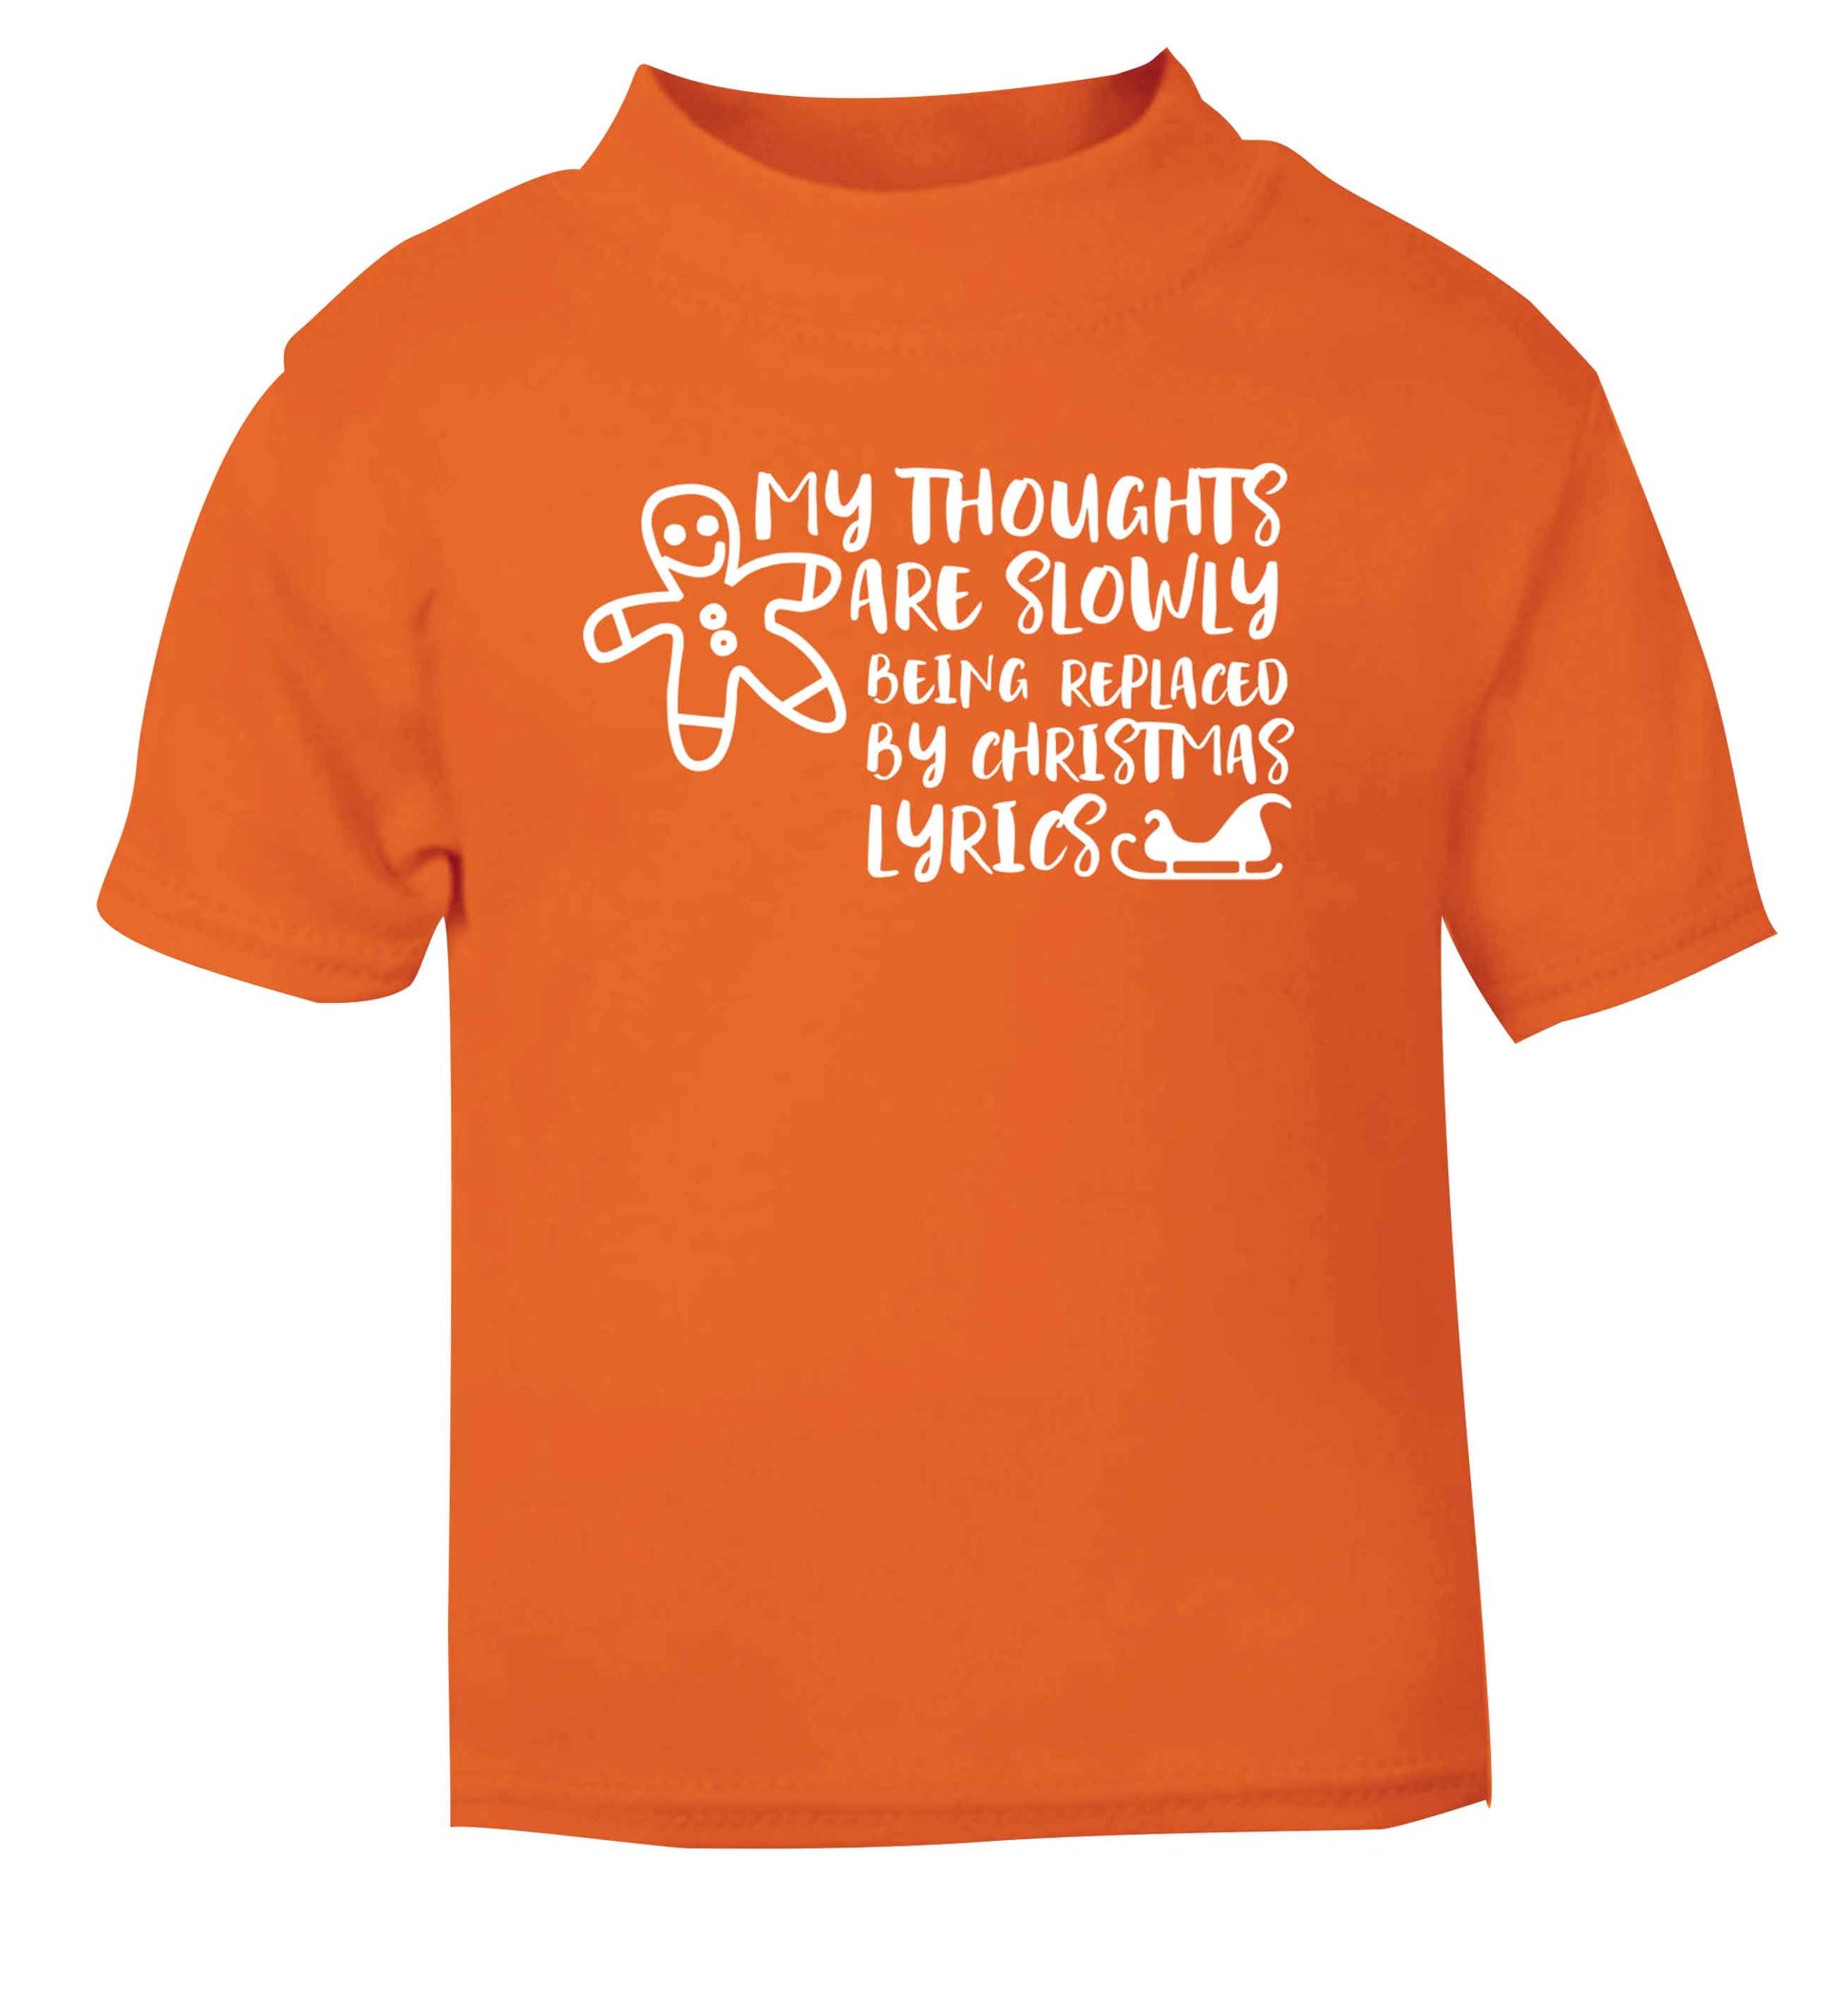 My thoughts are slowly being replaced by Christmas lyrics orange Baby Toddler Tshirt 2 Years